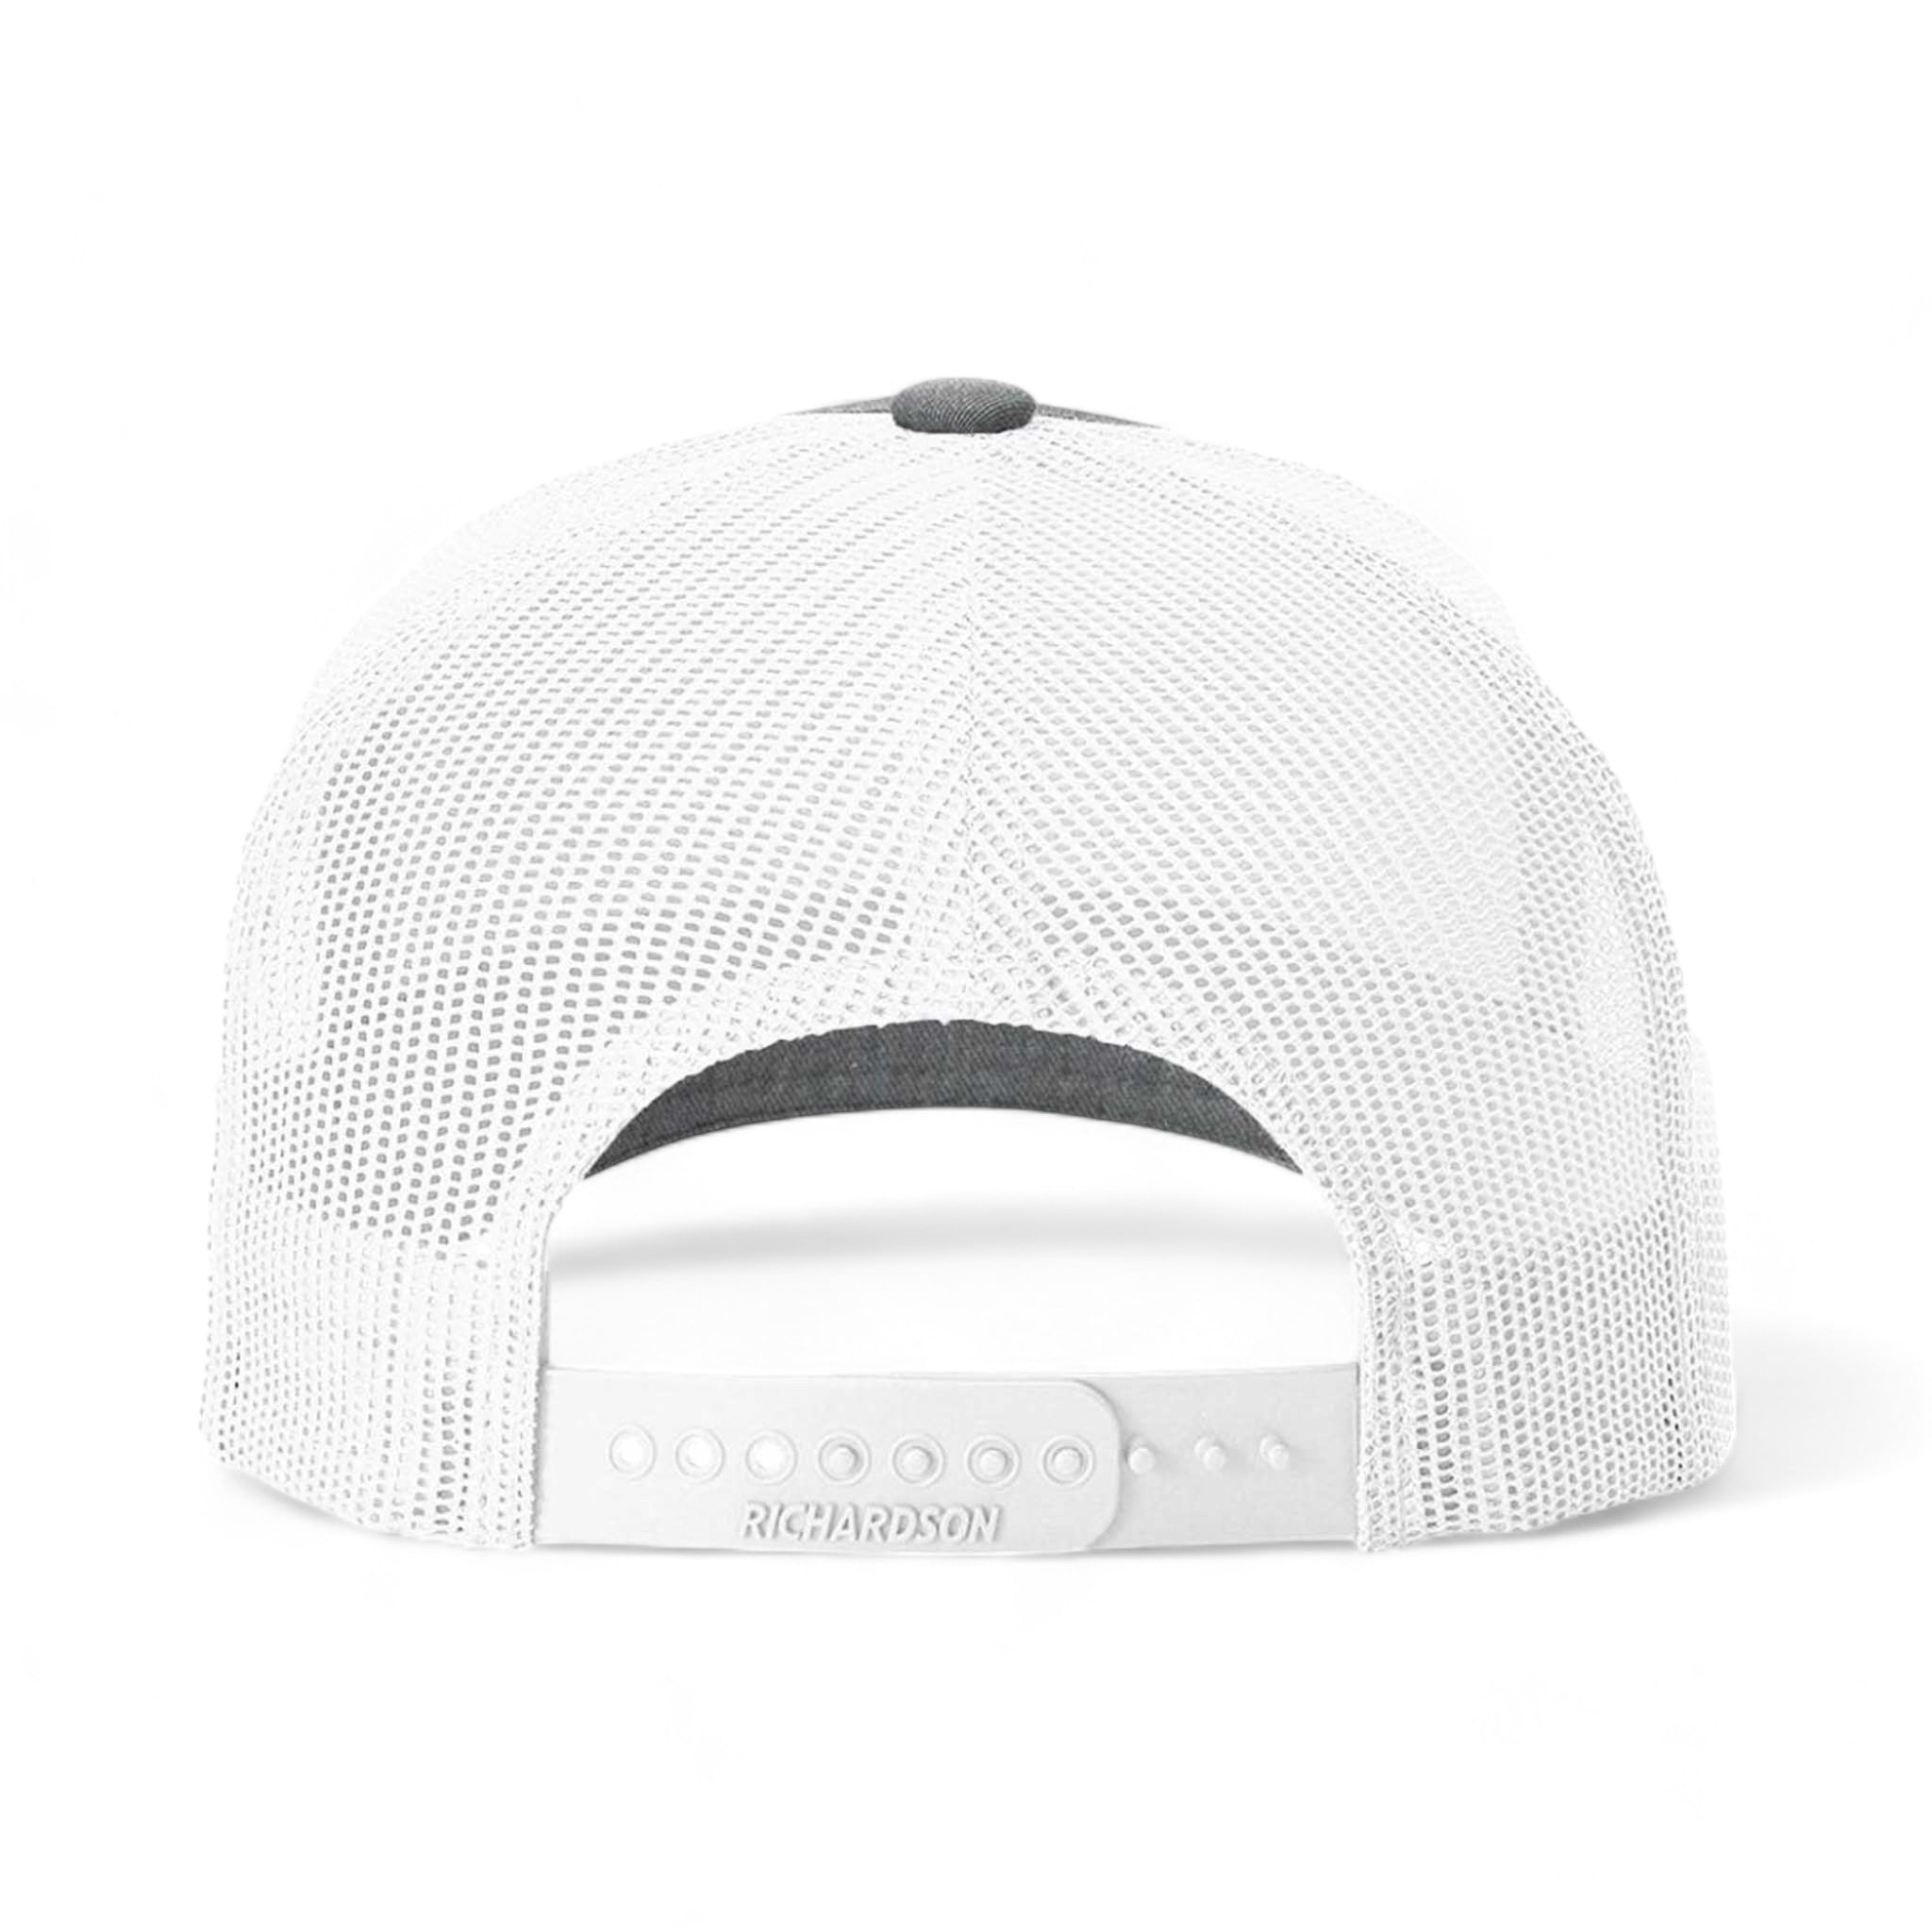 Back view of Richardson 112FPR custom hat in heather grey and white